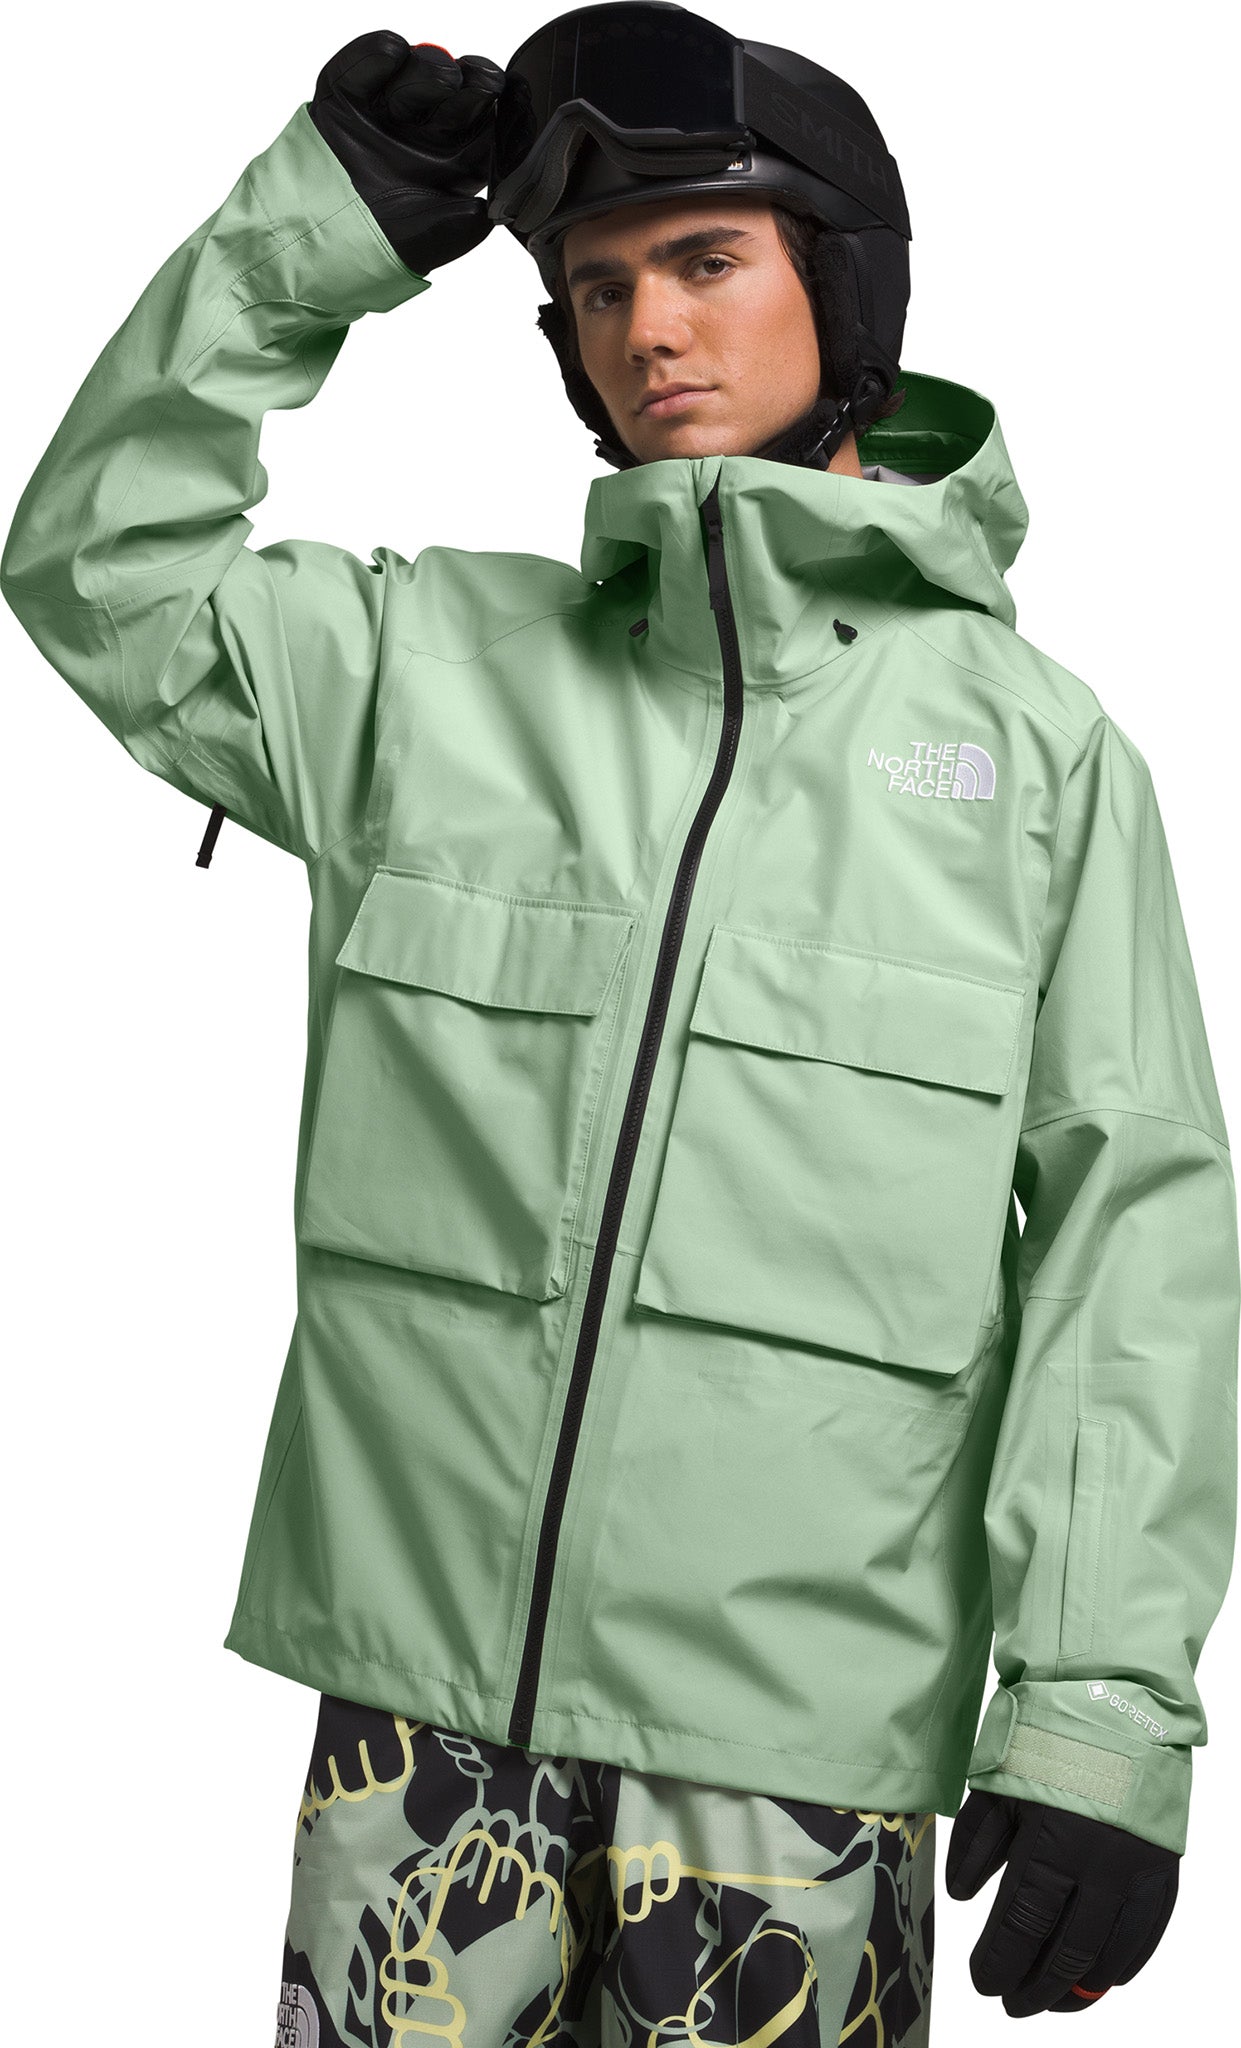 The North Face Canada: Jackets, Gear & Accessories | Altitude Sports